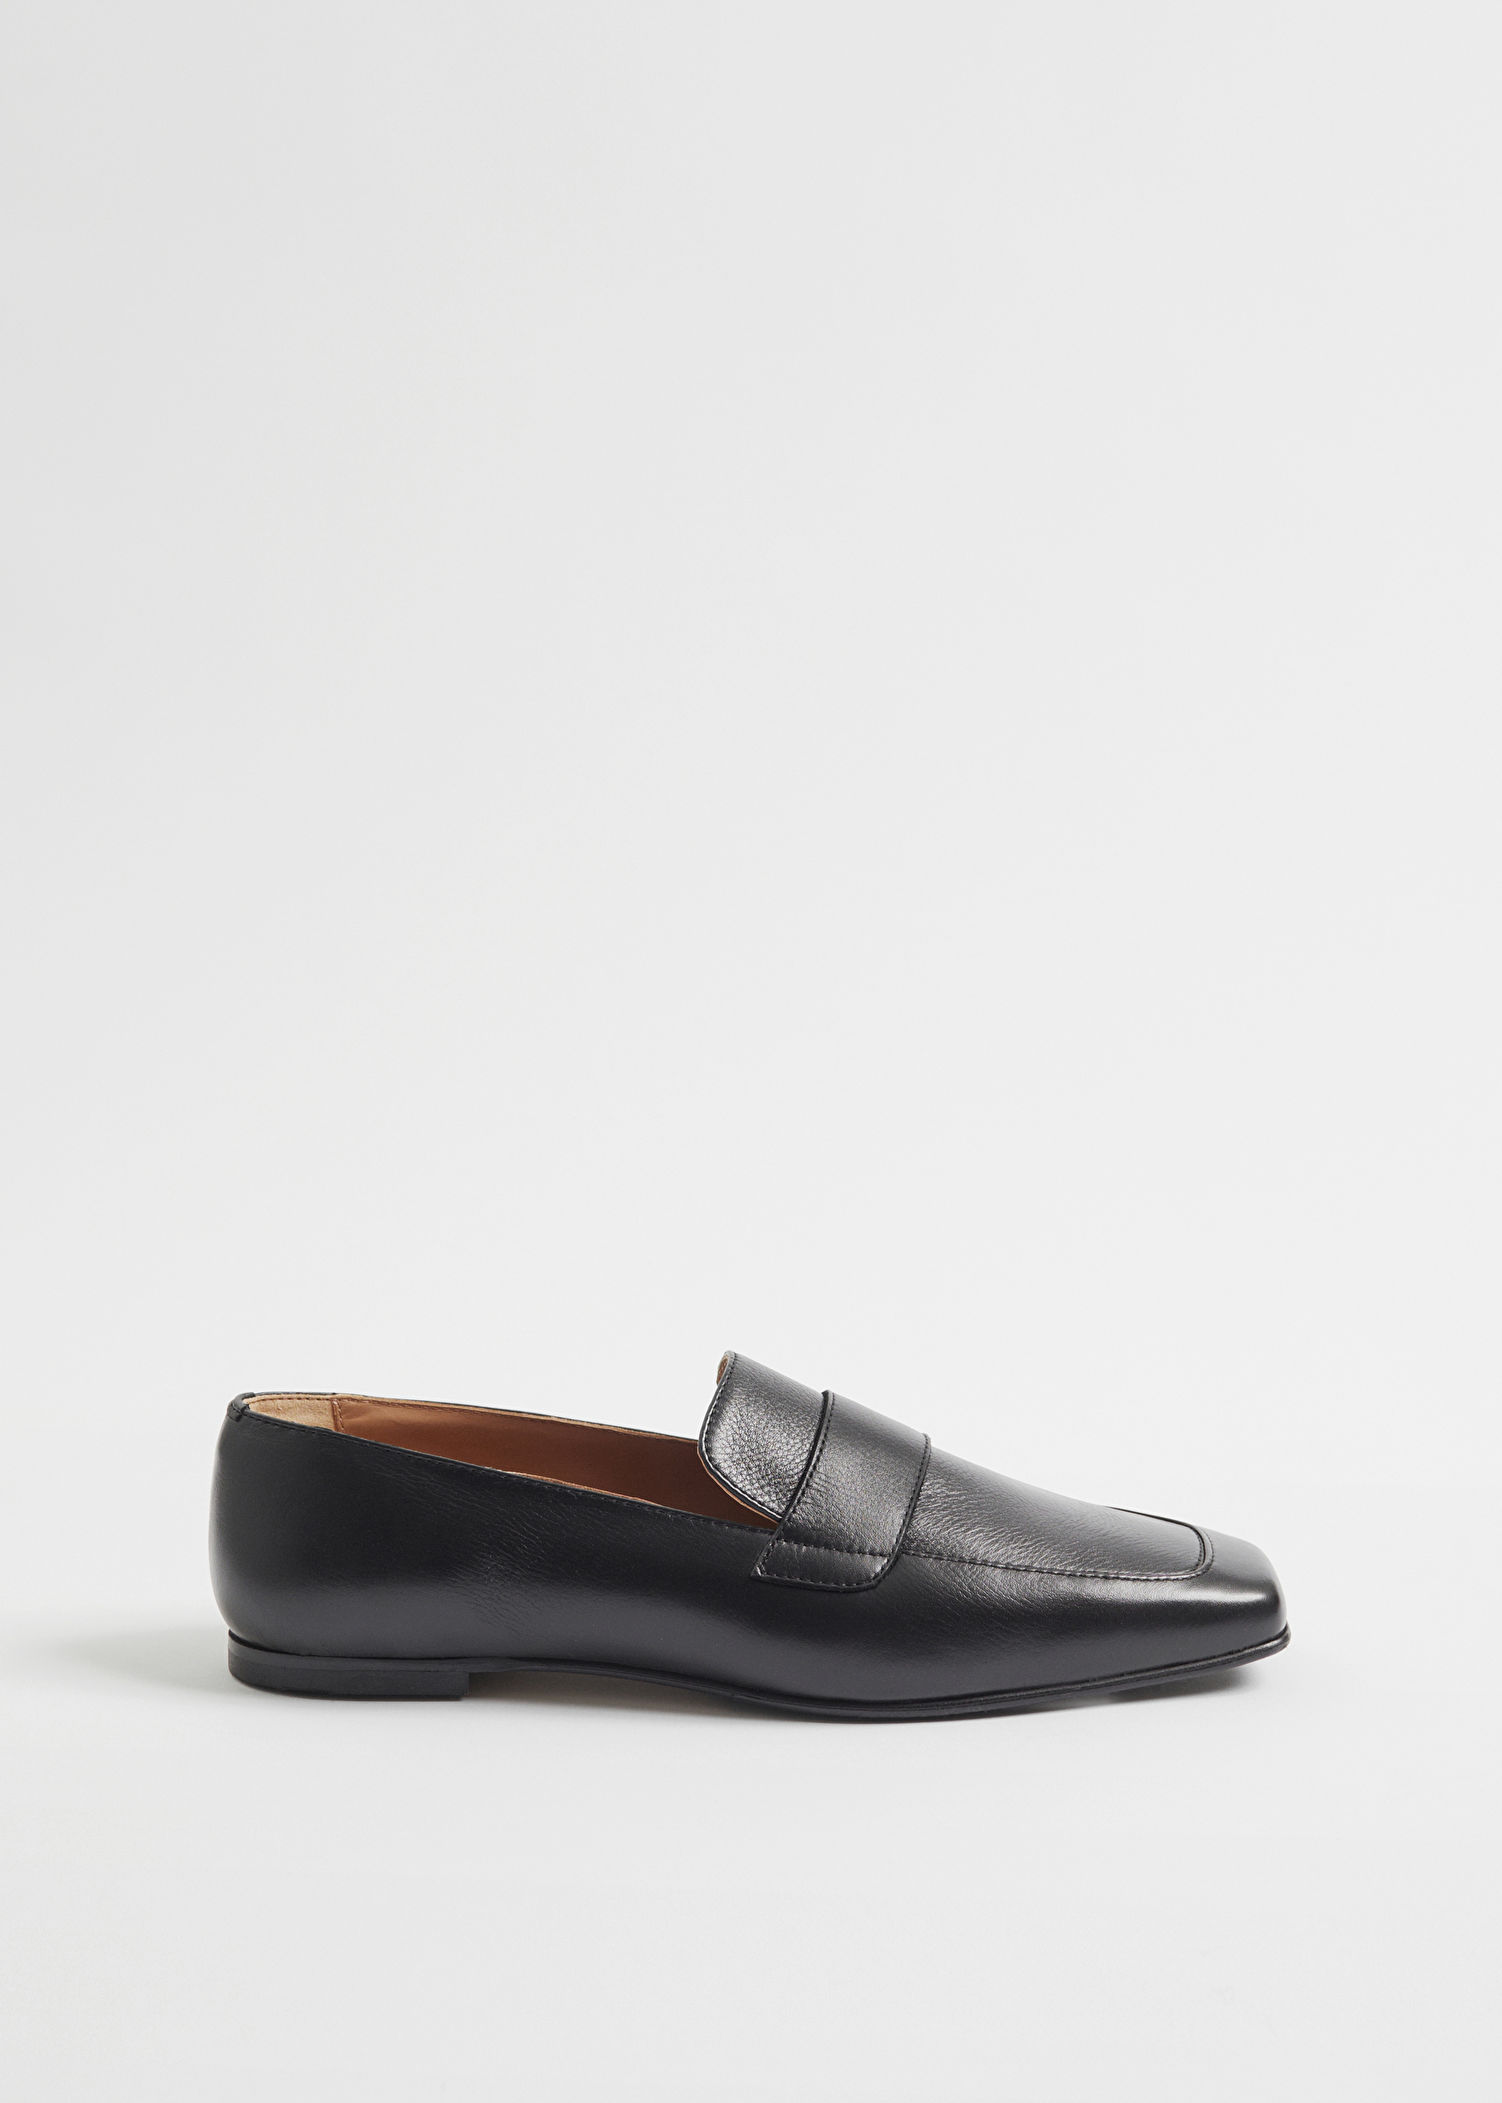 The Affordable Loafers That Look Designer | Who What Wear UK